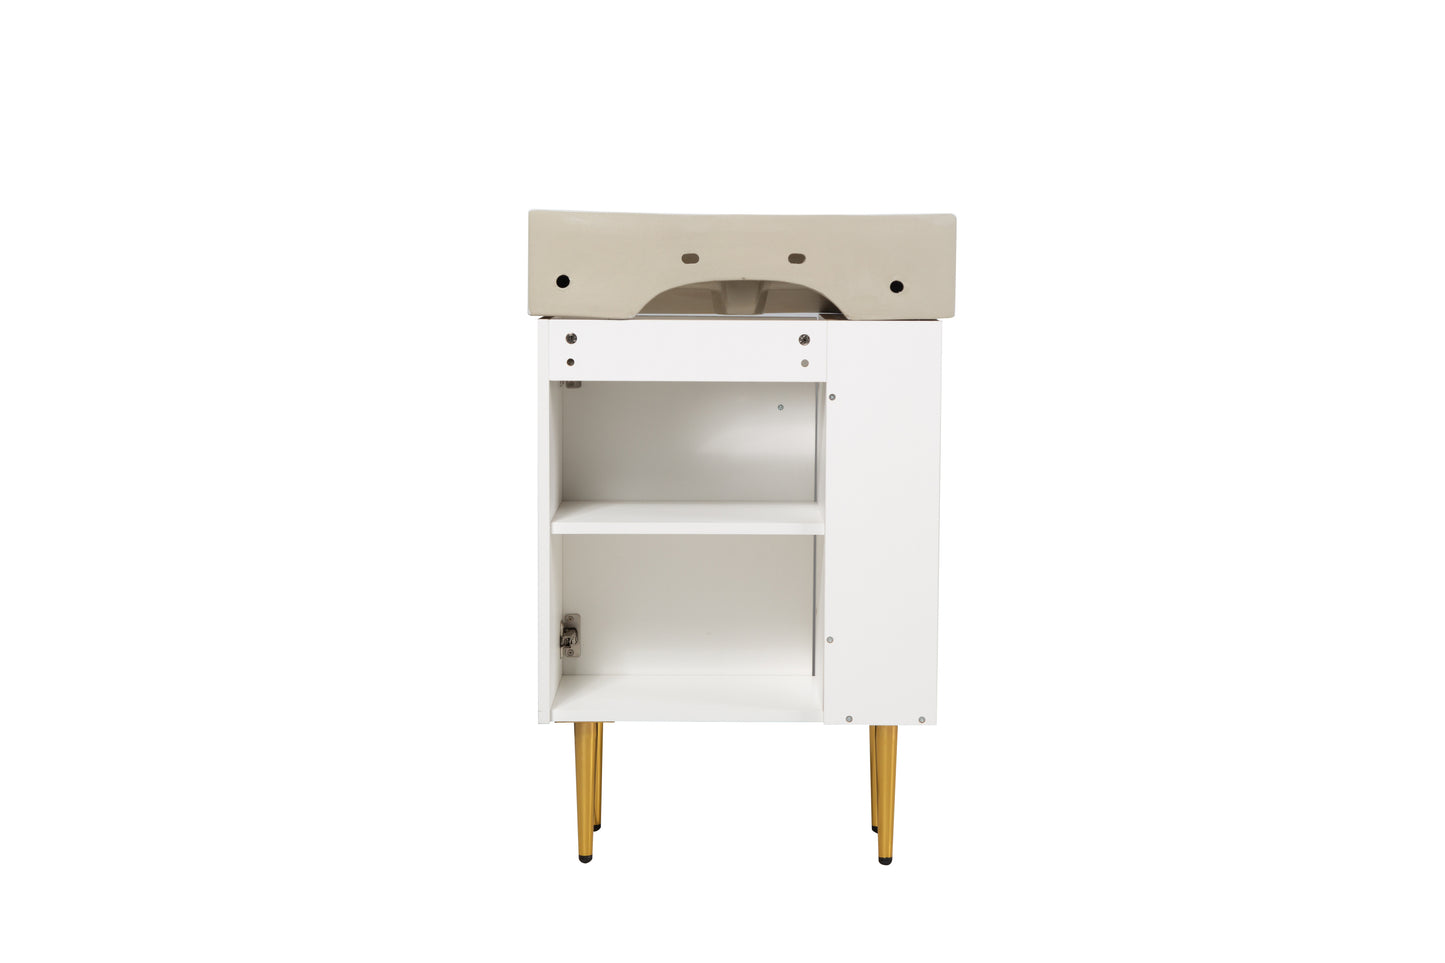 21.6" Open-shelving Bathroom Vanity with Ceramic Sink, Cloakroom Open Shelf Storage Cabinet, White Ceramic Countertop with Soft-Closing Door on the Right Side, 23VB06-21WHR